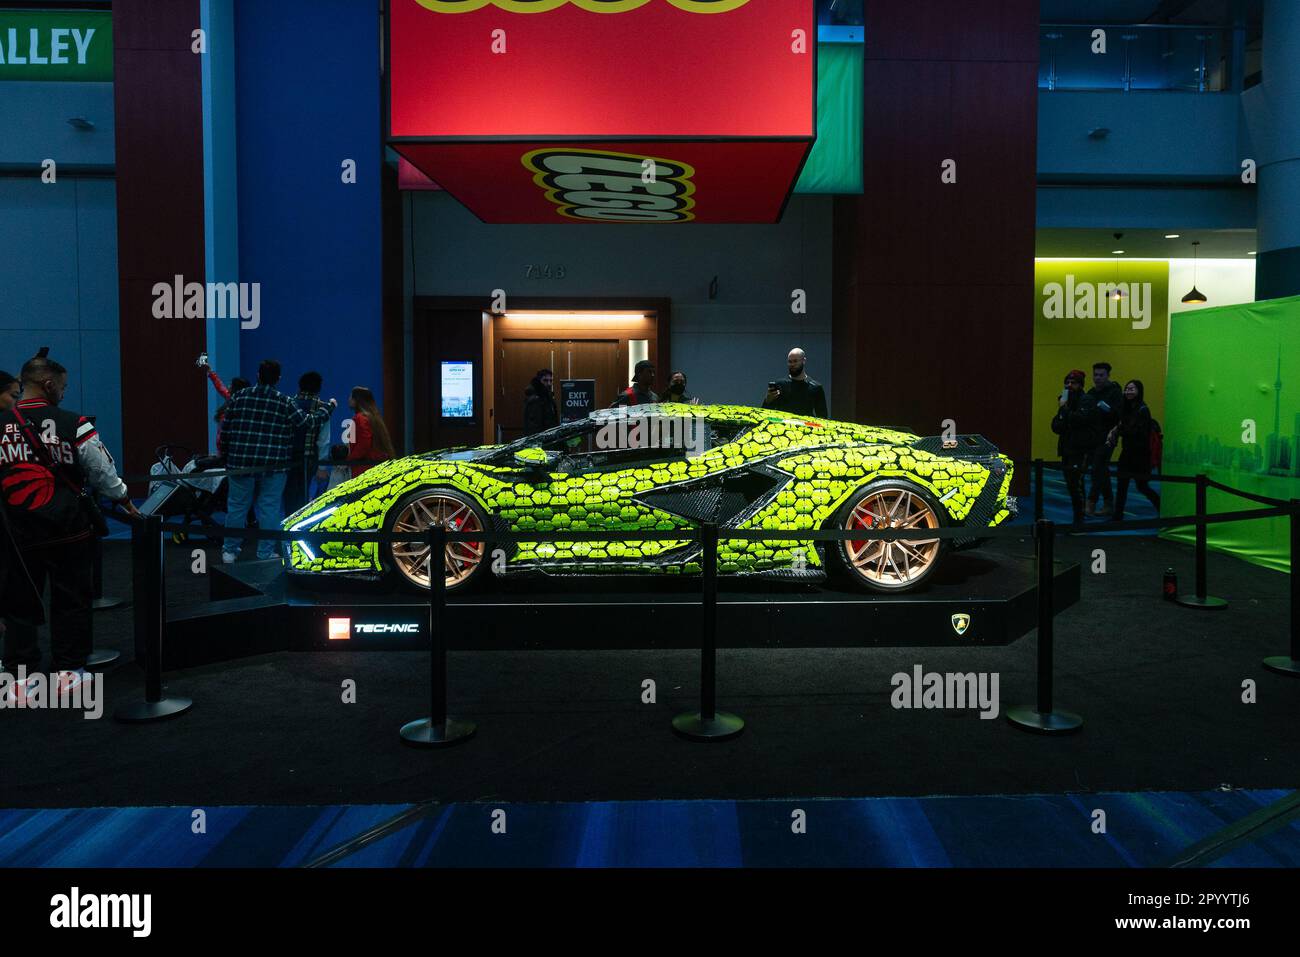 LEGO designers built a life-sized Lamborghini from more than 400,000 pieces